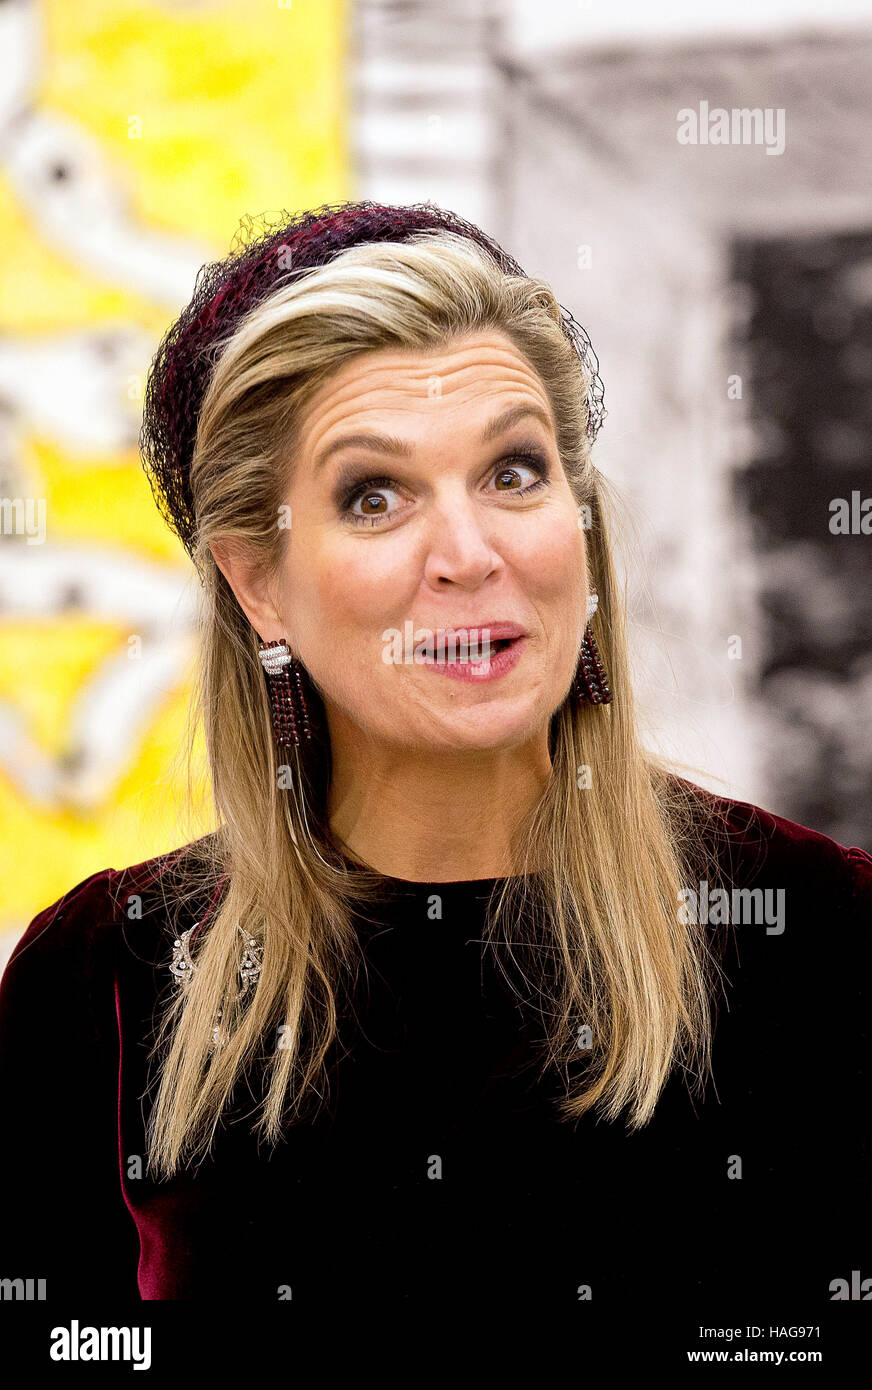 Amstelveen, Netherlands. 29th Nov, 2016. Amstelveen, 29-11-2016 Queen Máxima visit to the exhebition of Pierre Alechinsky ·Post Cobra·, at the Cobra museum in Aalsmeer 2nd day of the State-visit from HM King Filip and HM Queen Mathilde of Belgium to the Netherlands RPE/Albert Nieboer/NETHERLANDSOUT/Point de Vue Out - NO WIRE SERVICE - Photo: Rpe/Albert Nieboer/RoyalPress/dpa/Alamy Live News Stock Photo